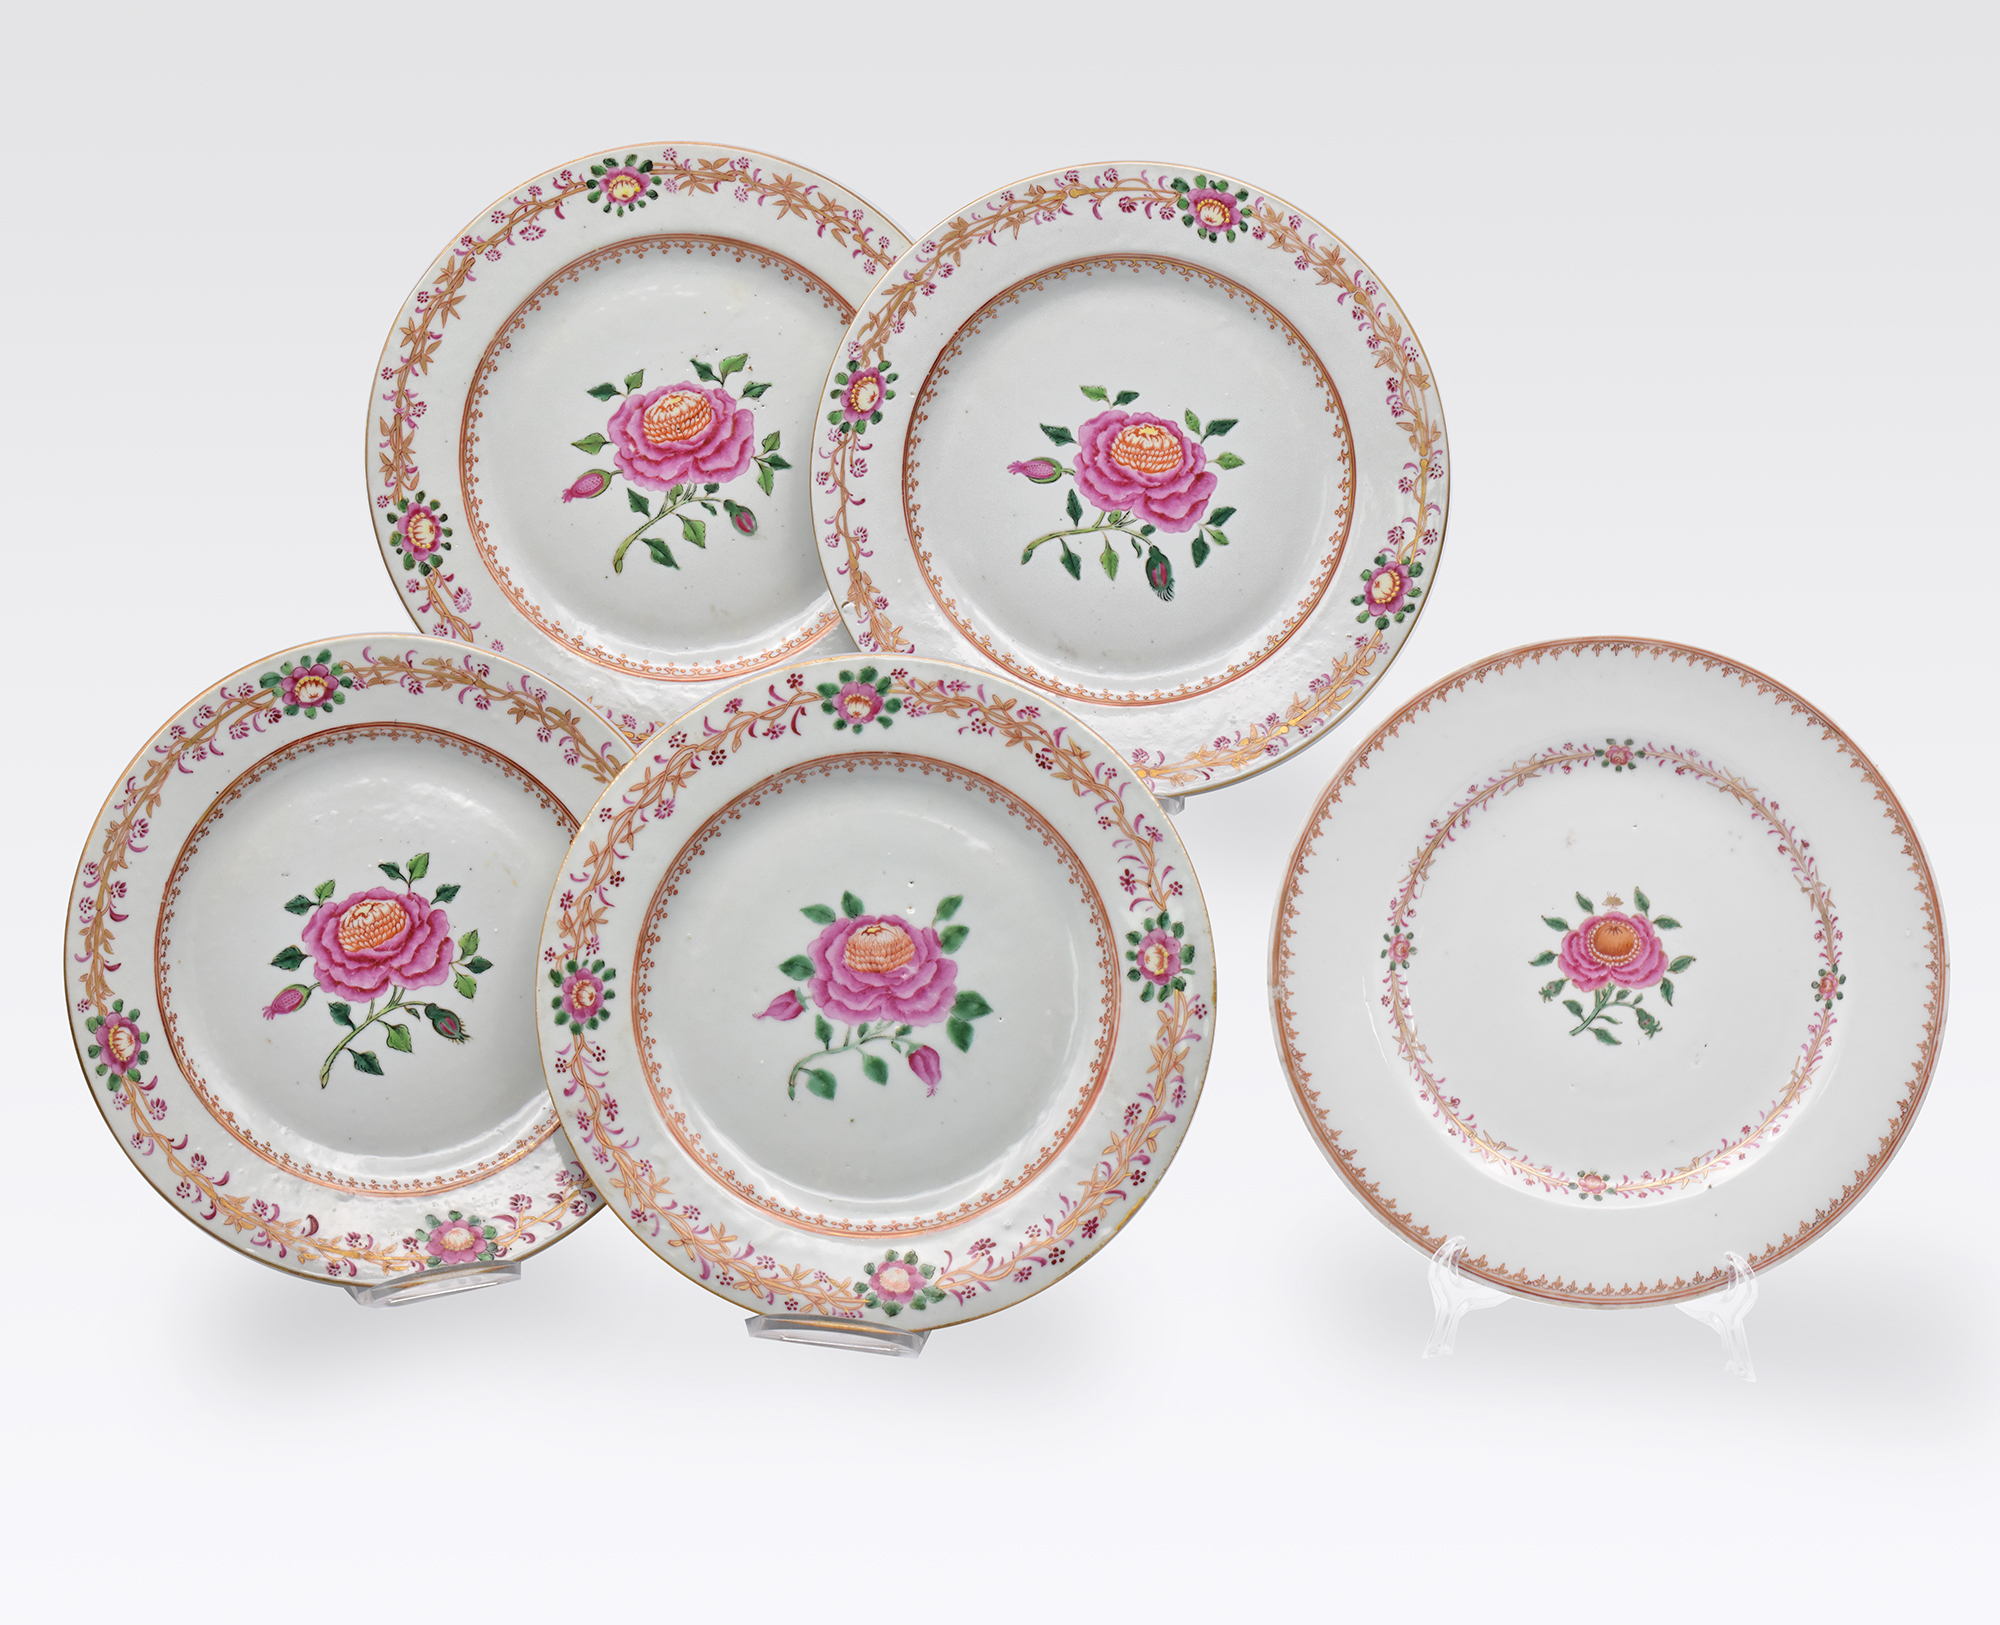 FOUR CHINESE EXPORT ‘FAMILLE-ROSE’ PORCELAIN ‘ADAM’S’ PATTERN PLATES, QIANLONG PERIOD, 1736 – 1795